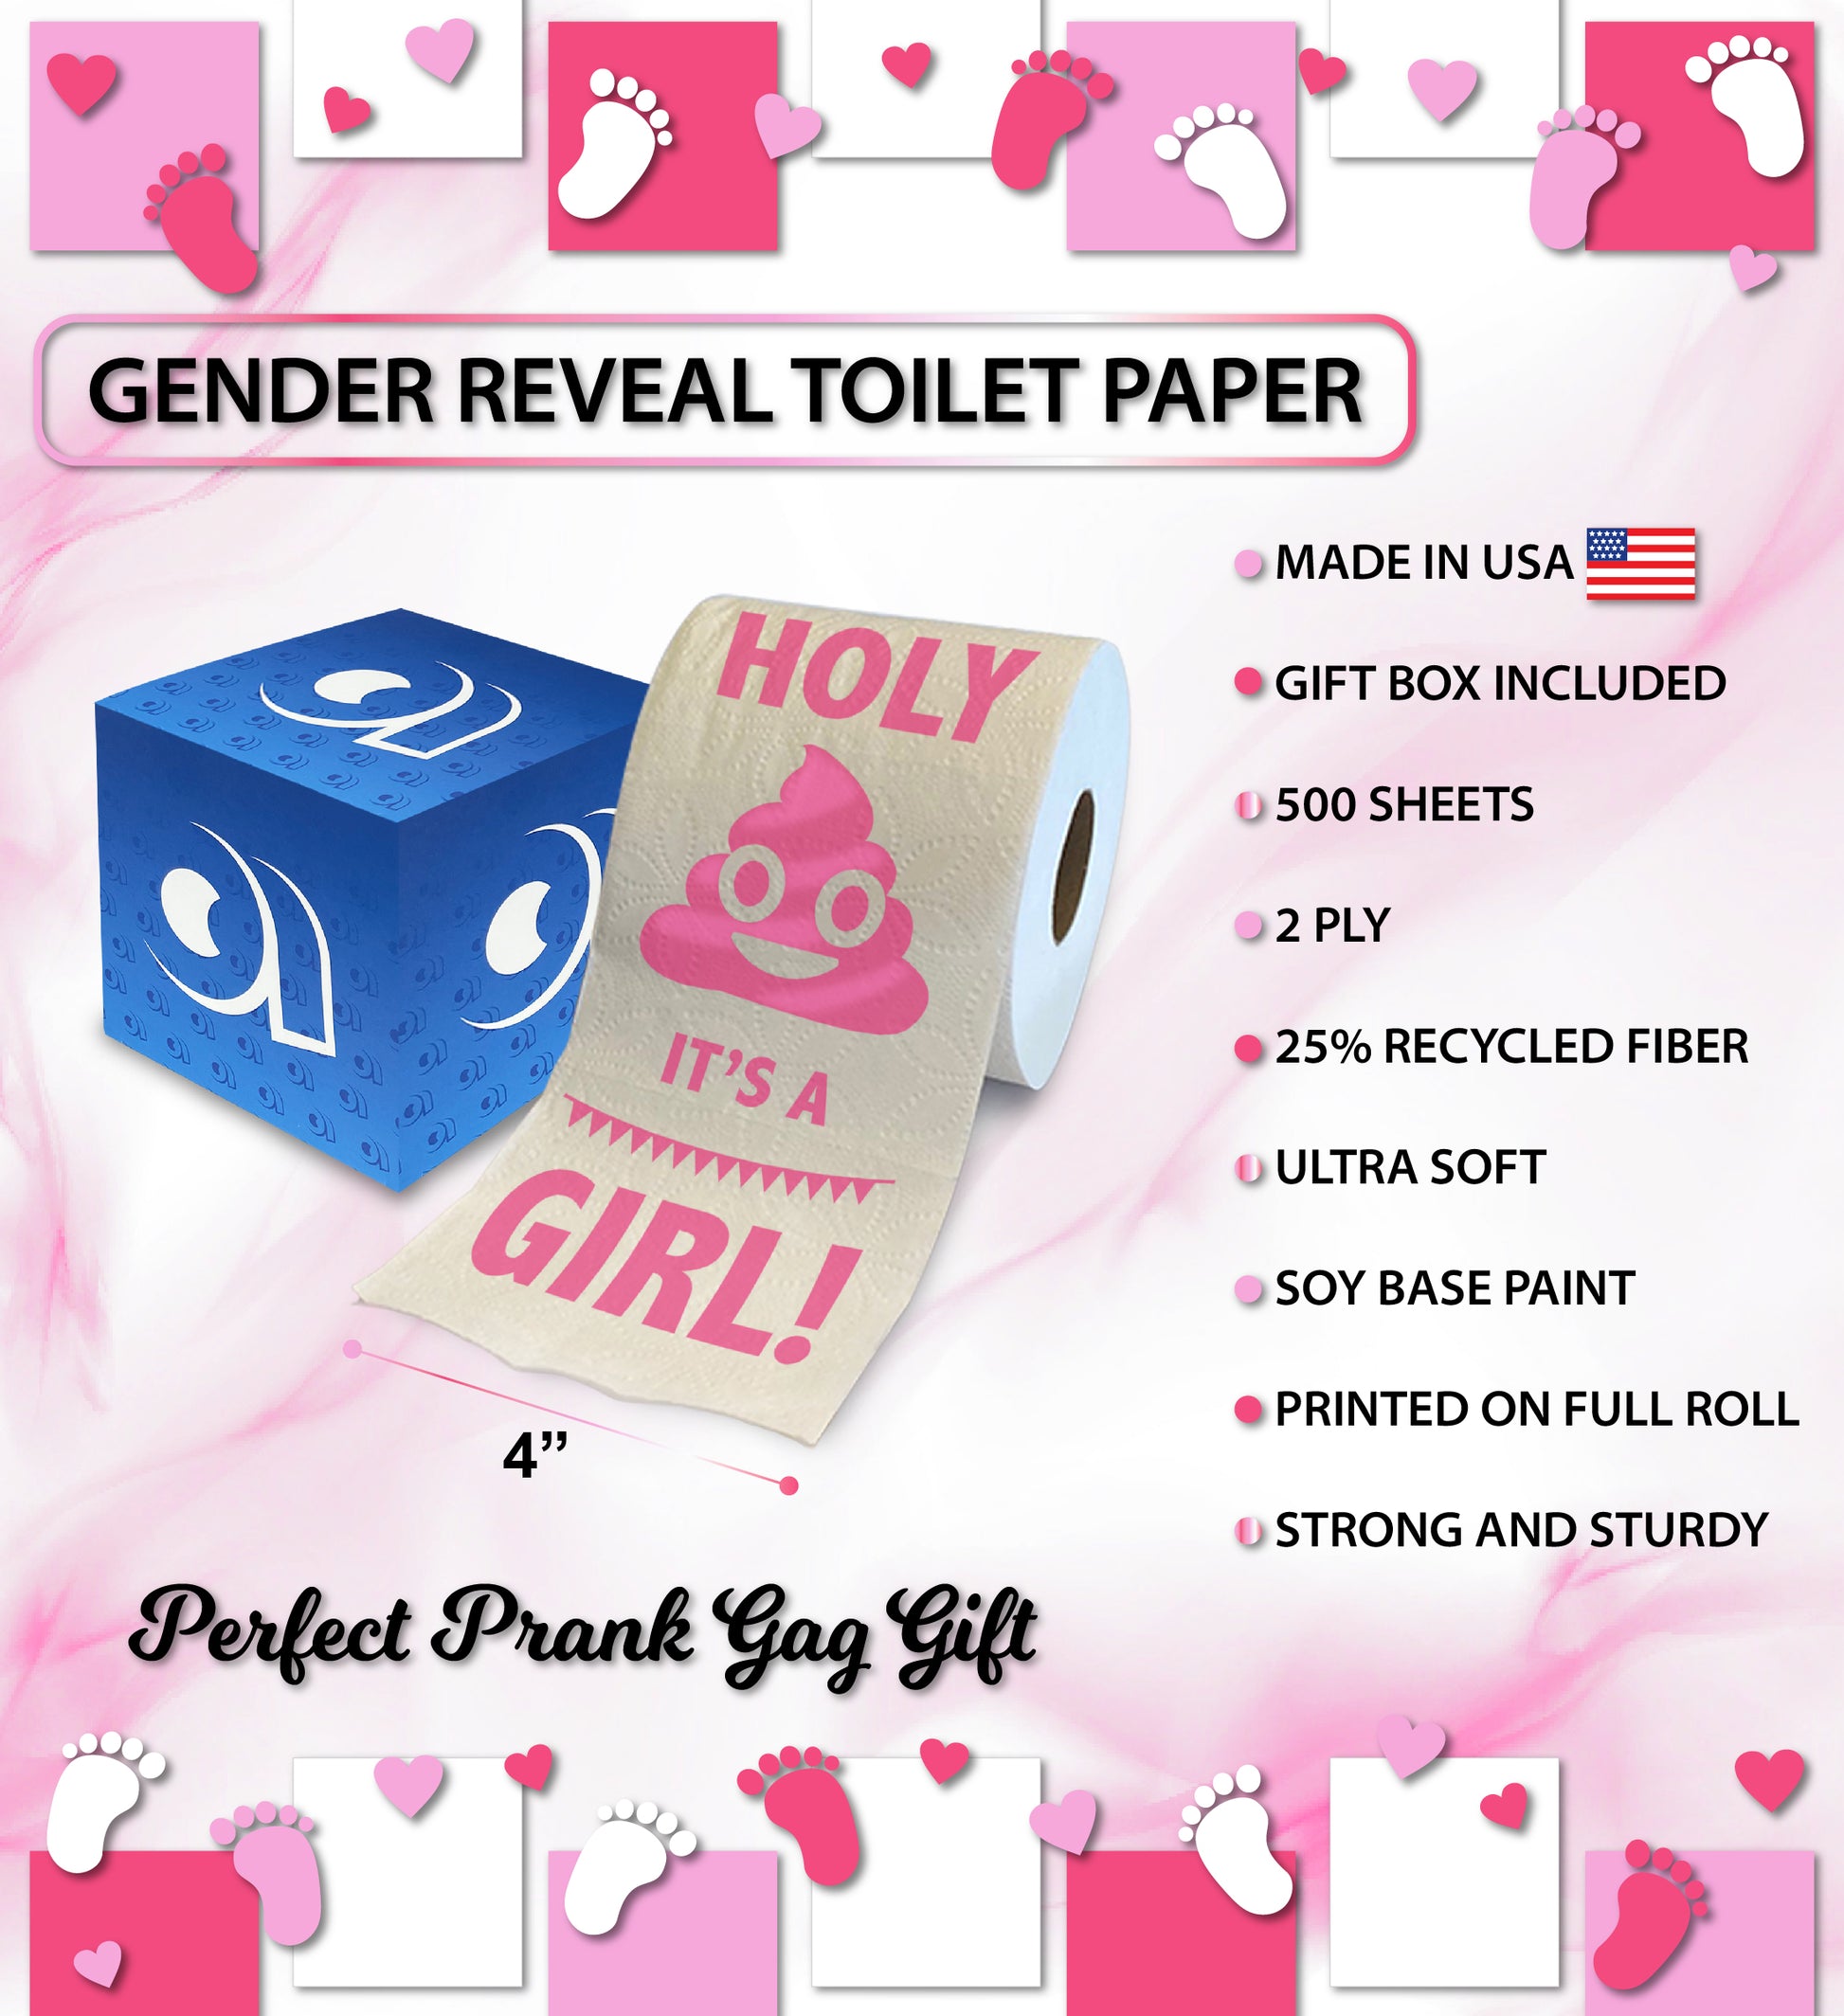 Printed TP Holy Poop It's A Girl! Printed Toilet Paper Gag Gift – Funny Roll for Girl Baby Shower Party Favors, Prank, Gender Reveal, Novelty